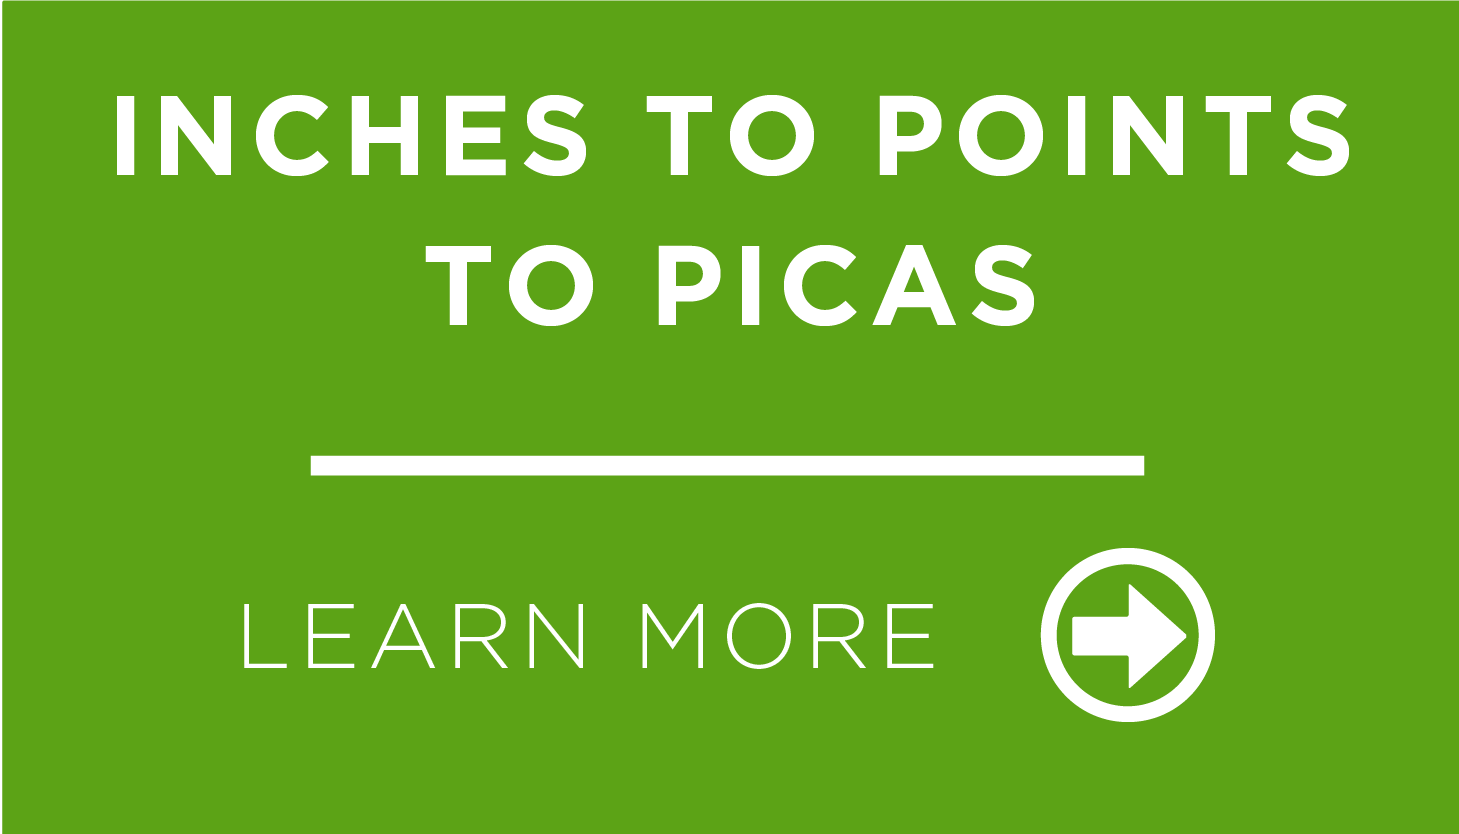 Inches to Points to Picas